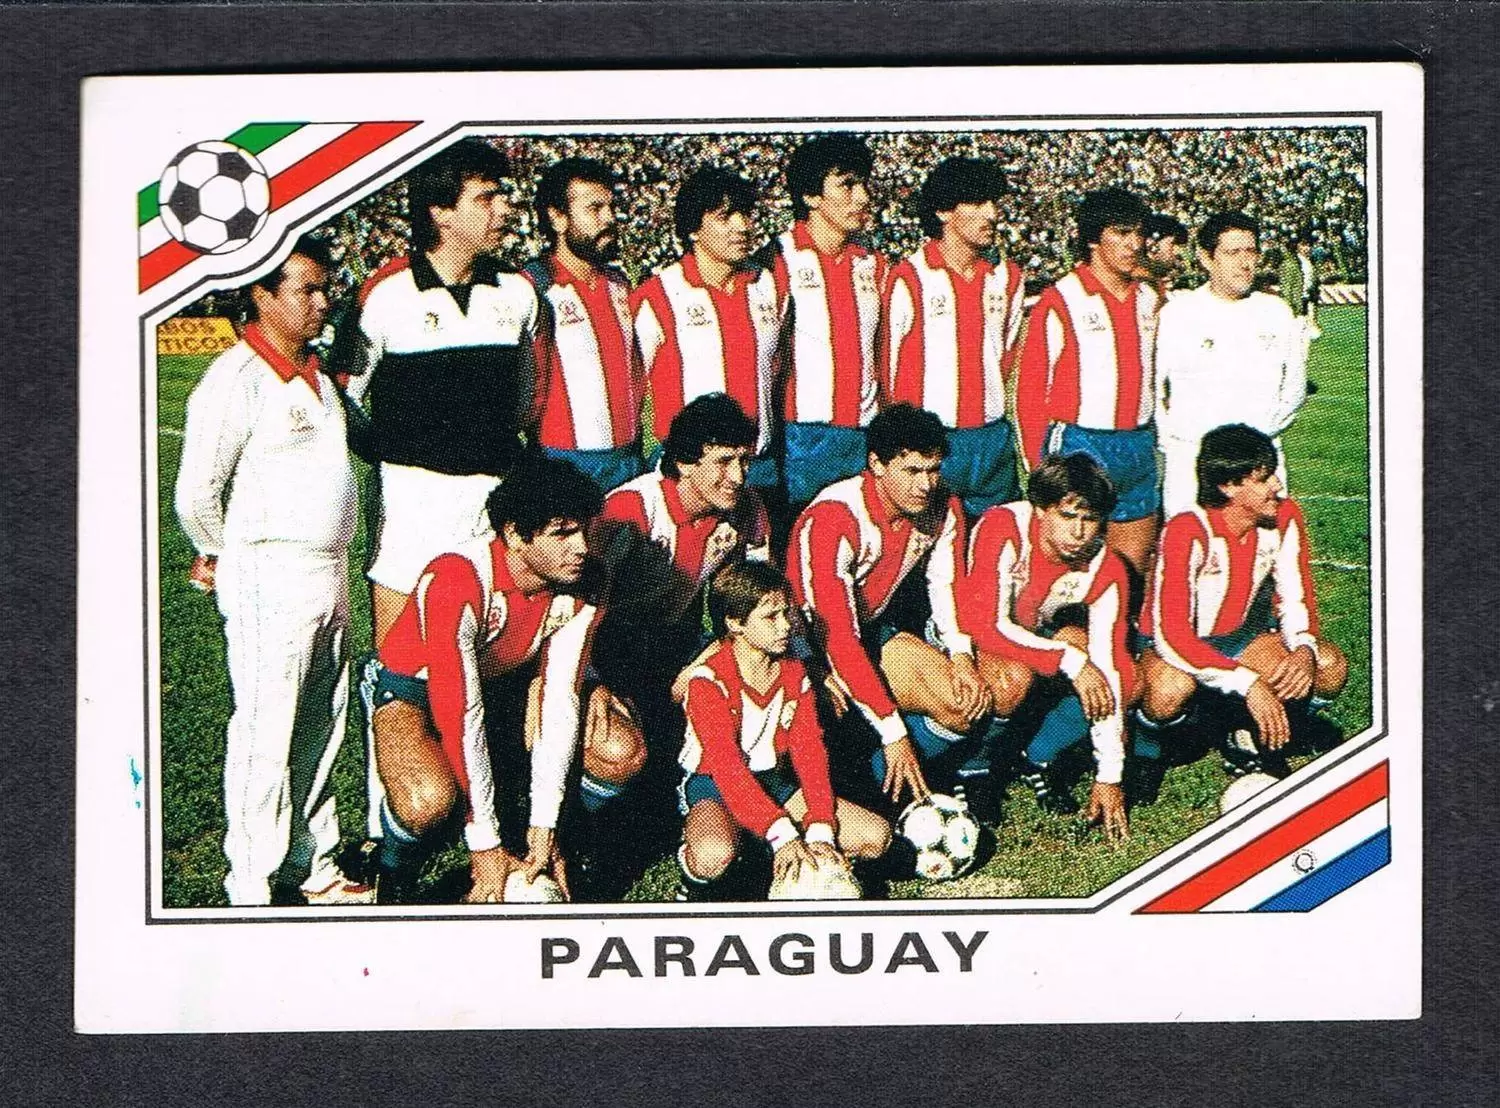 Mexico 86 World Cup - Paraguay Team  - Paraguay